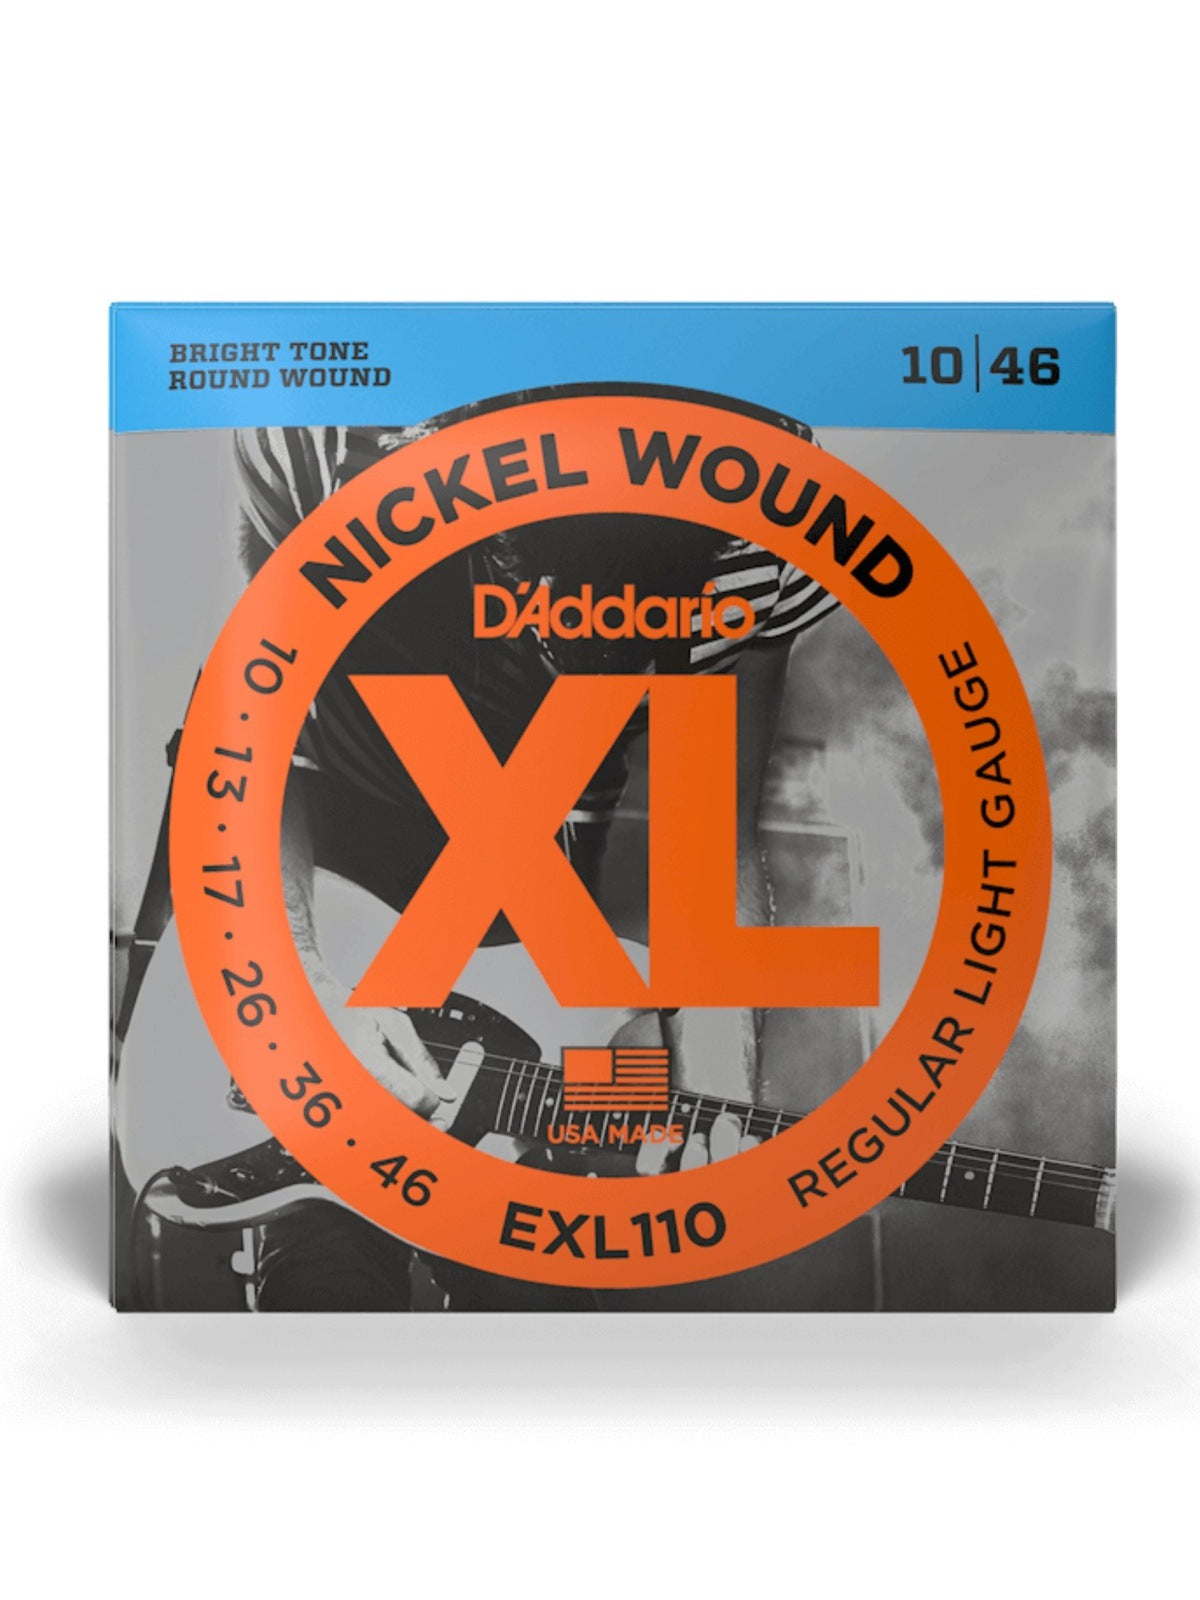 D'Addario XL Nickelwood Round Wound Electric Guitar Strings